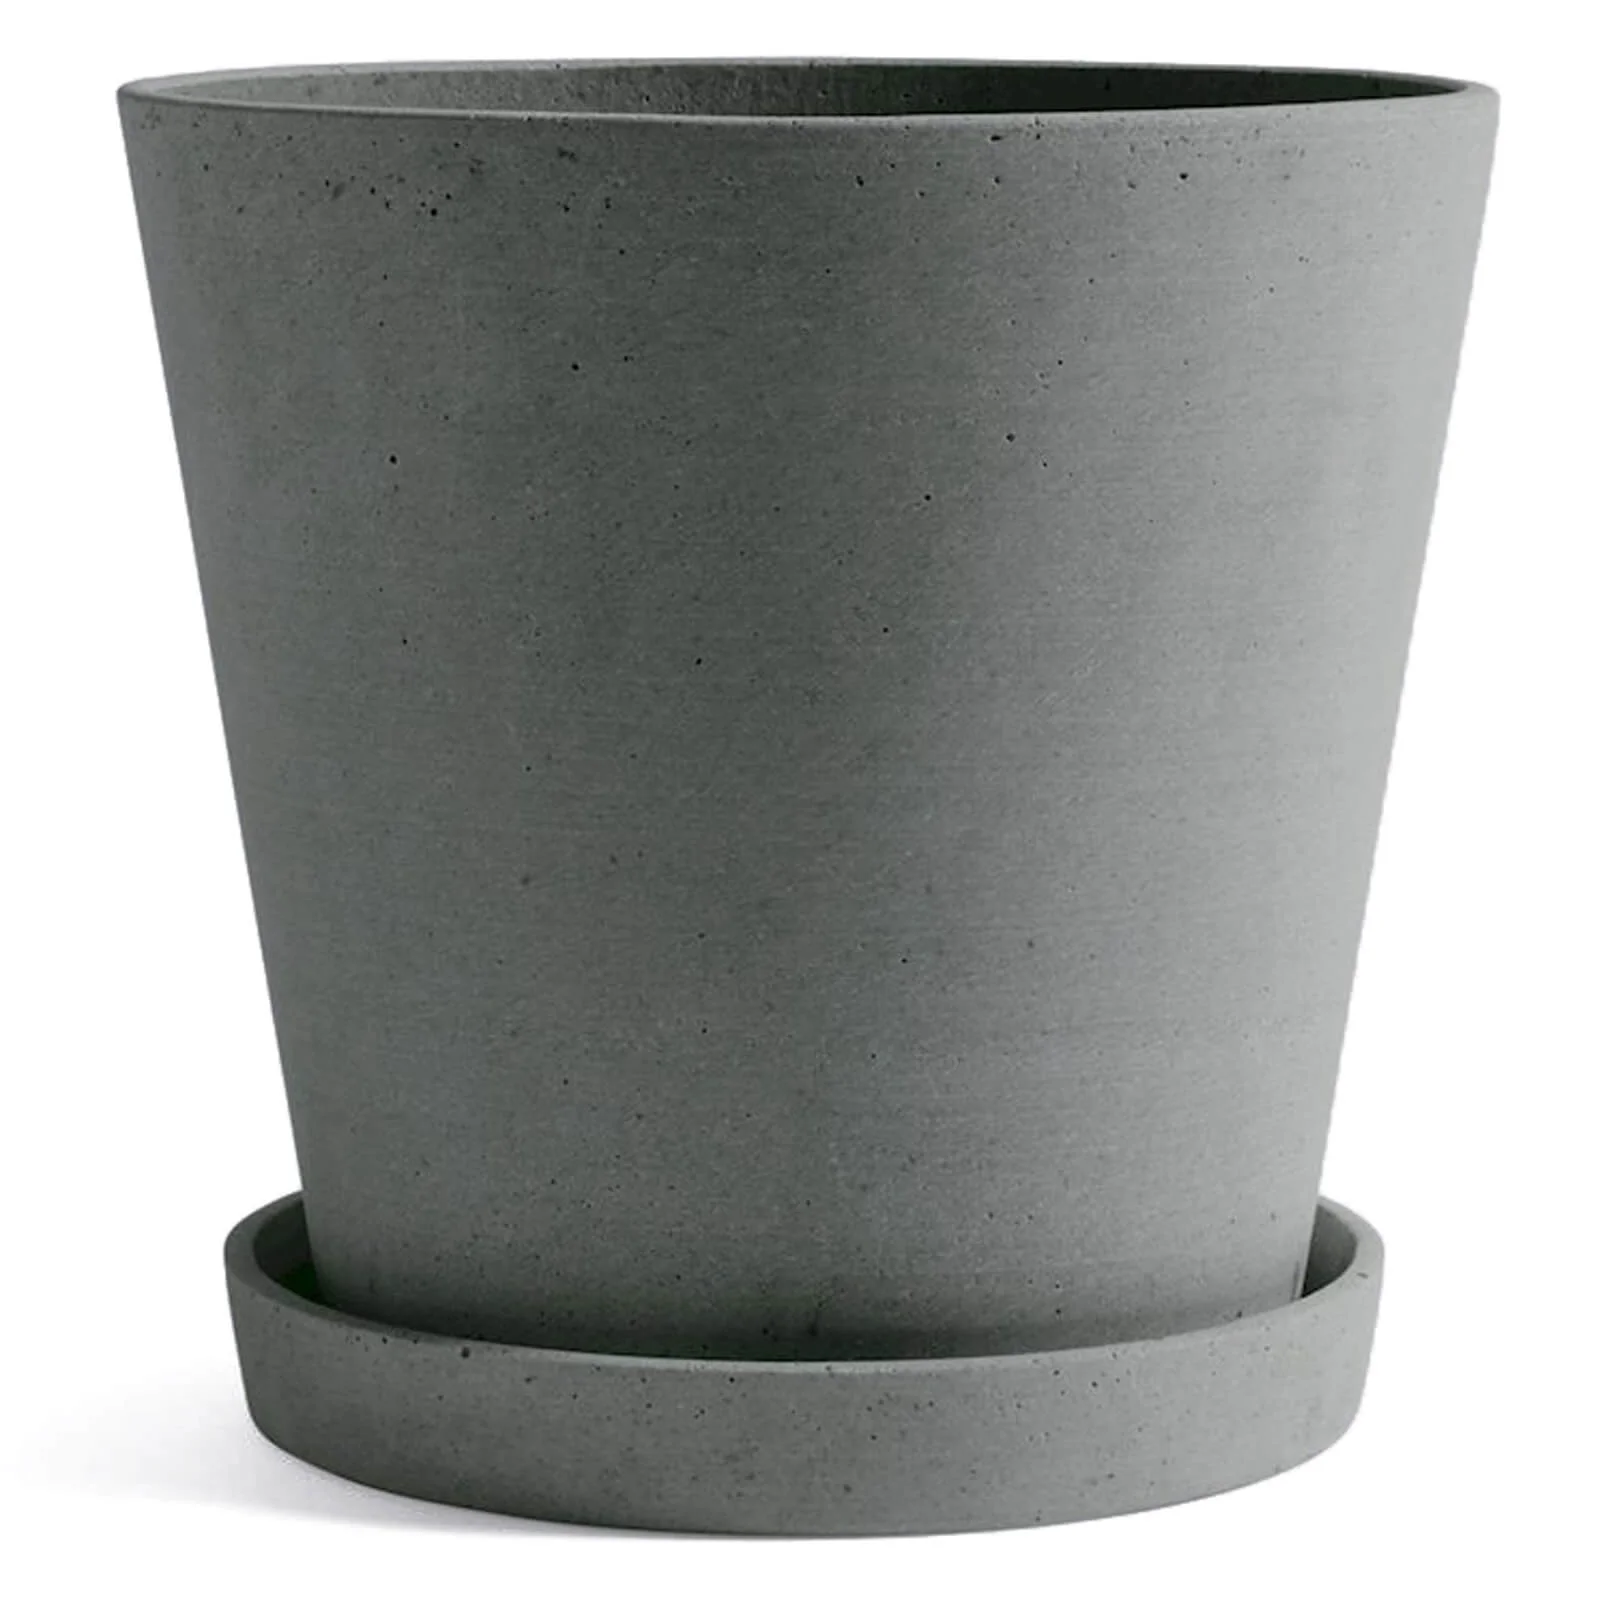 HAY Flowerpot with Saucer - Extra Large - Green Image 1